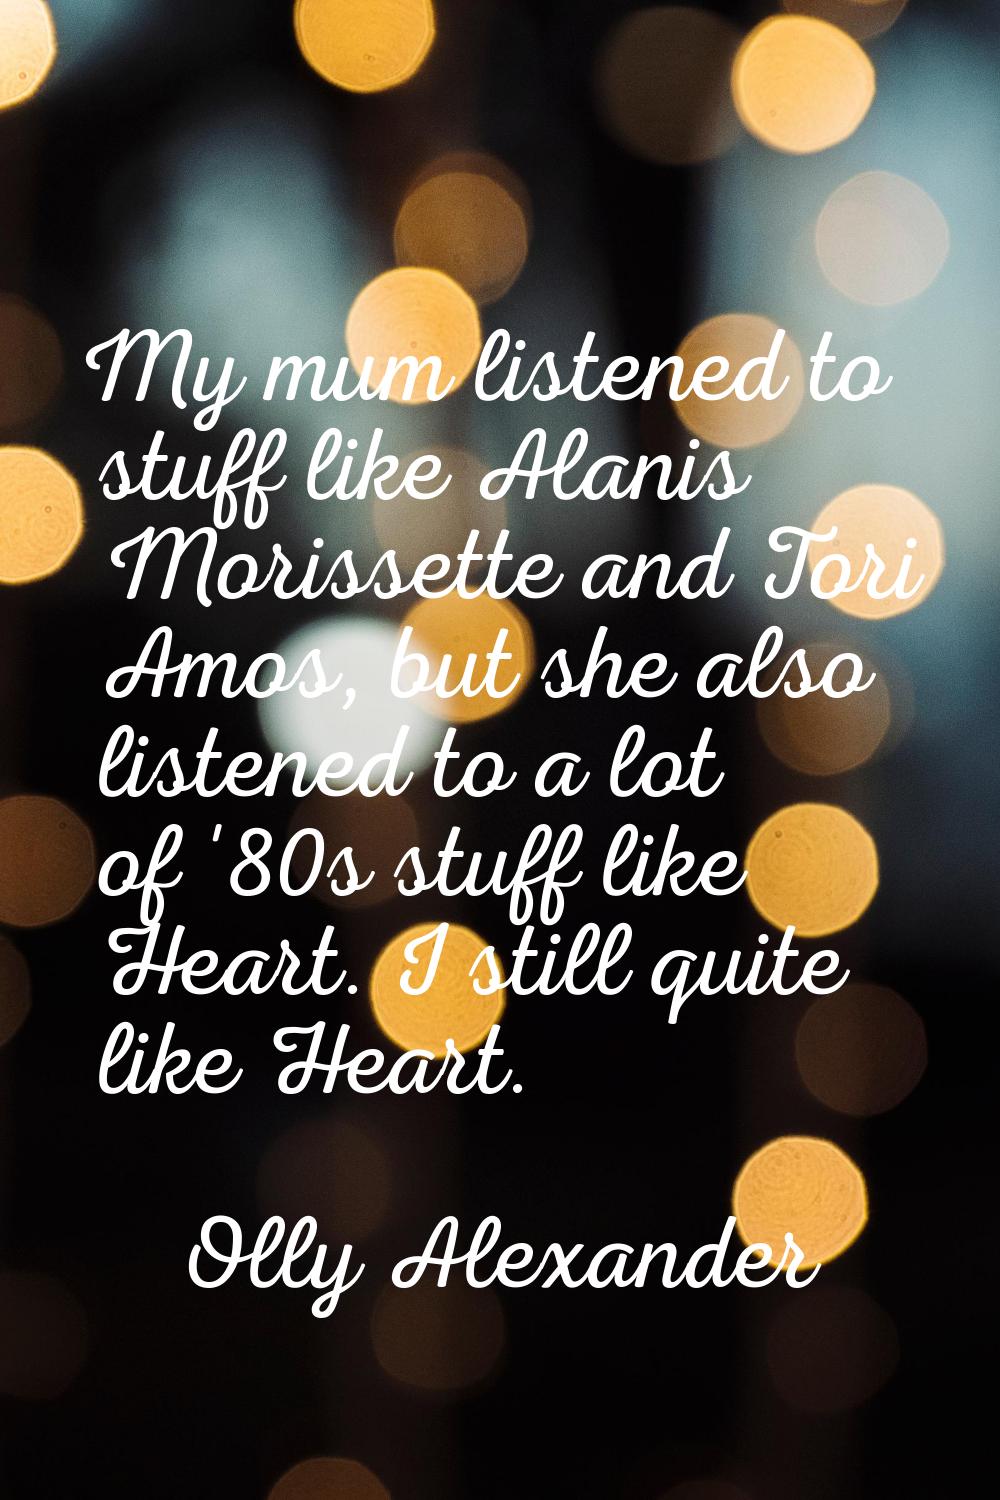 My mum listened to stuff like Alanis Morissette and Tori Amos, but she also listened to a lot of '8